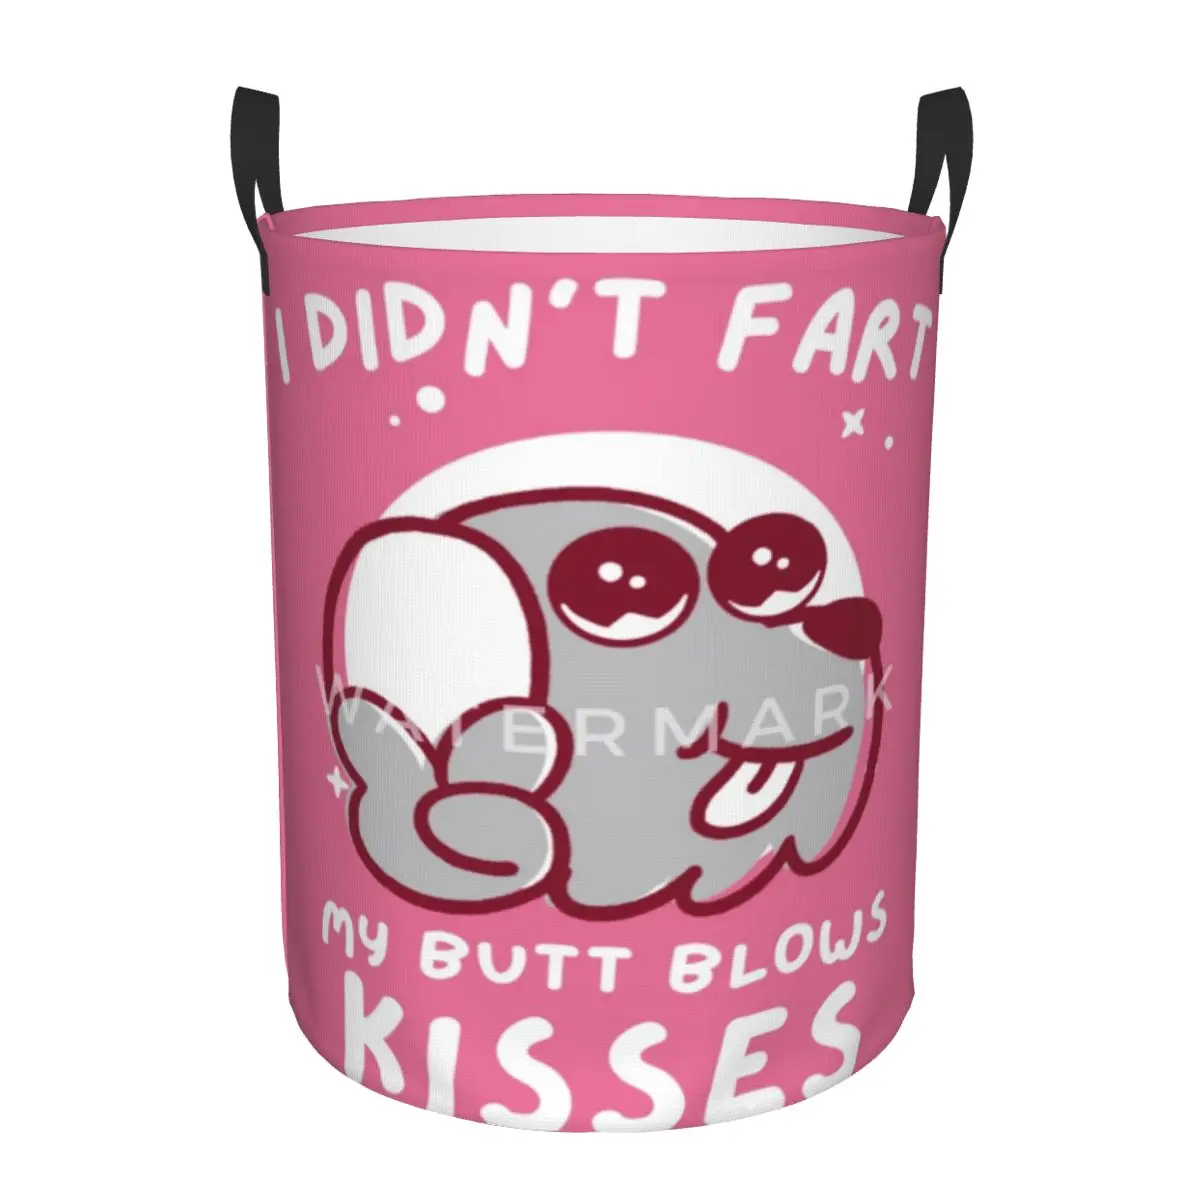 

I Don't Fart My Butt Blows Kisses Circular hamper,Storage Basket Sturdy and durable living rooms toys